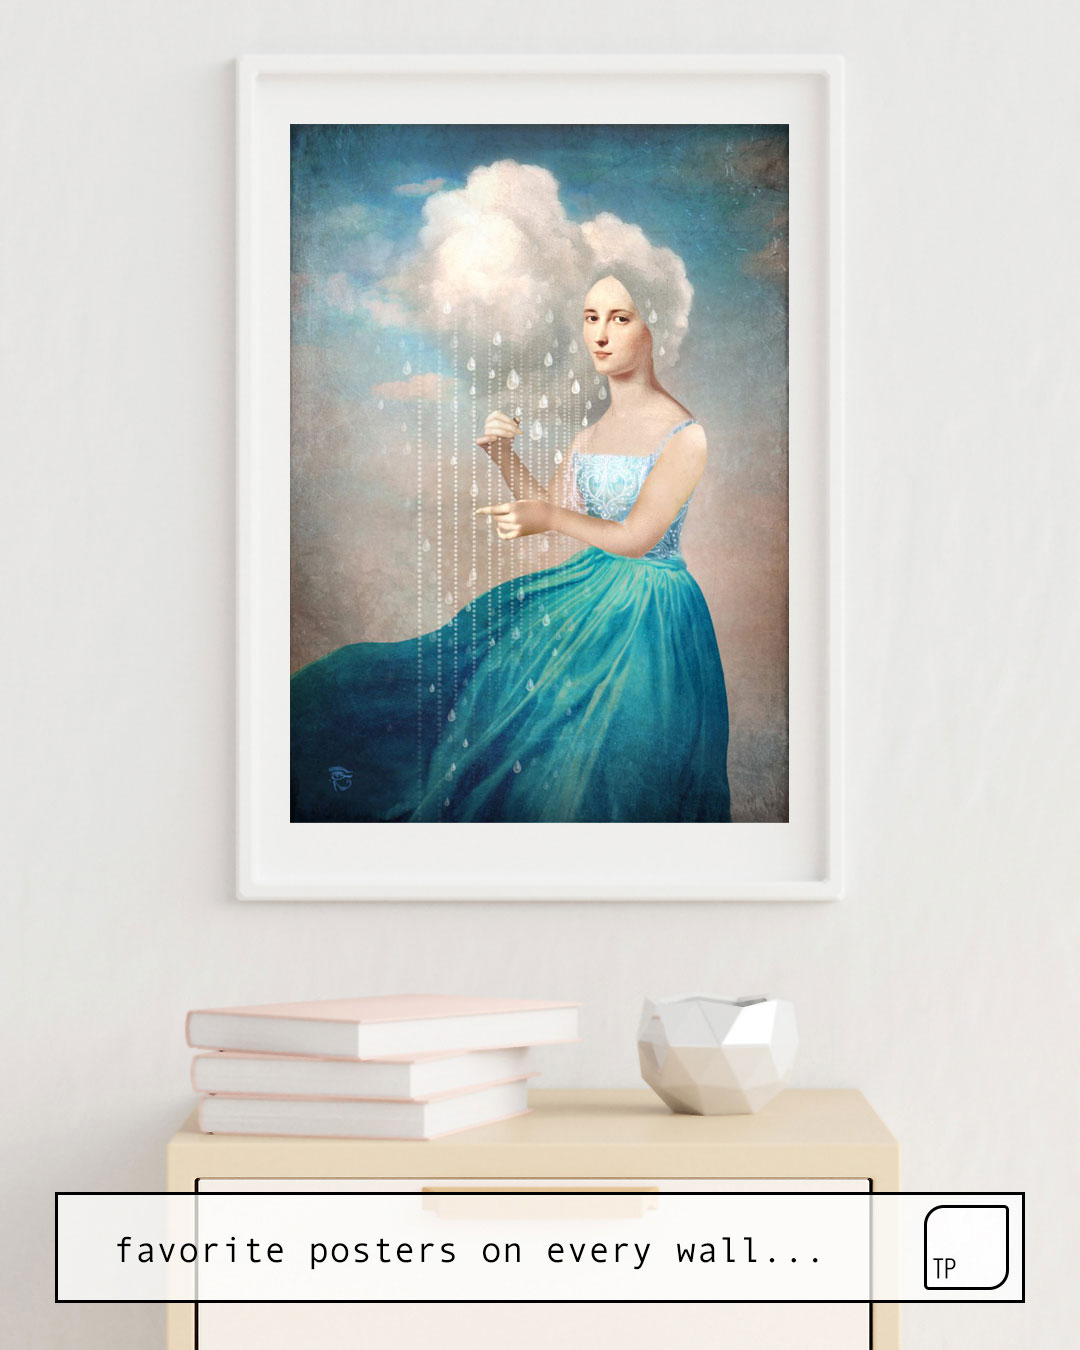 The photo shows an example of furnishing with the motif MELODY OF RAIN by Christian Schloe as mural